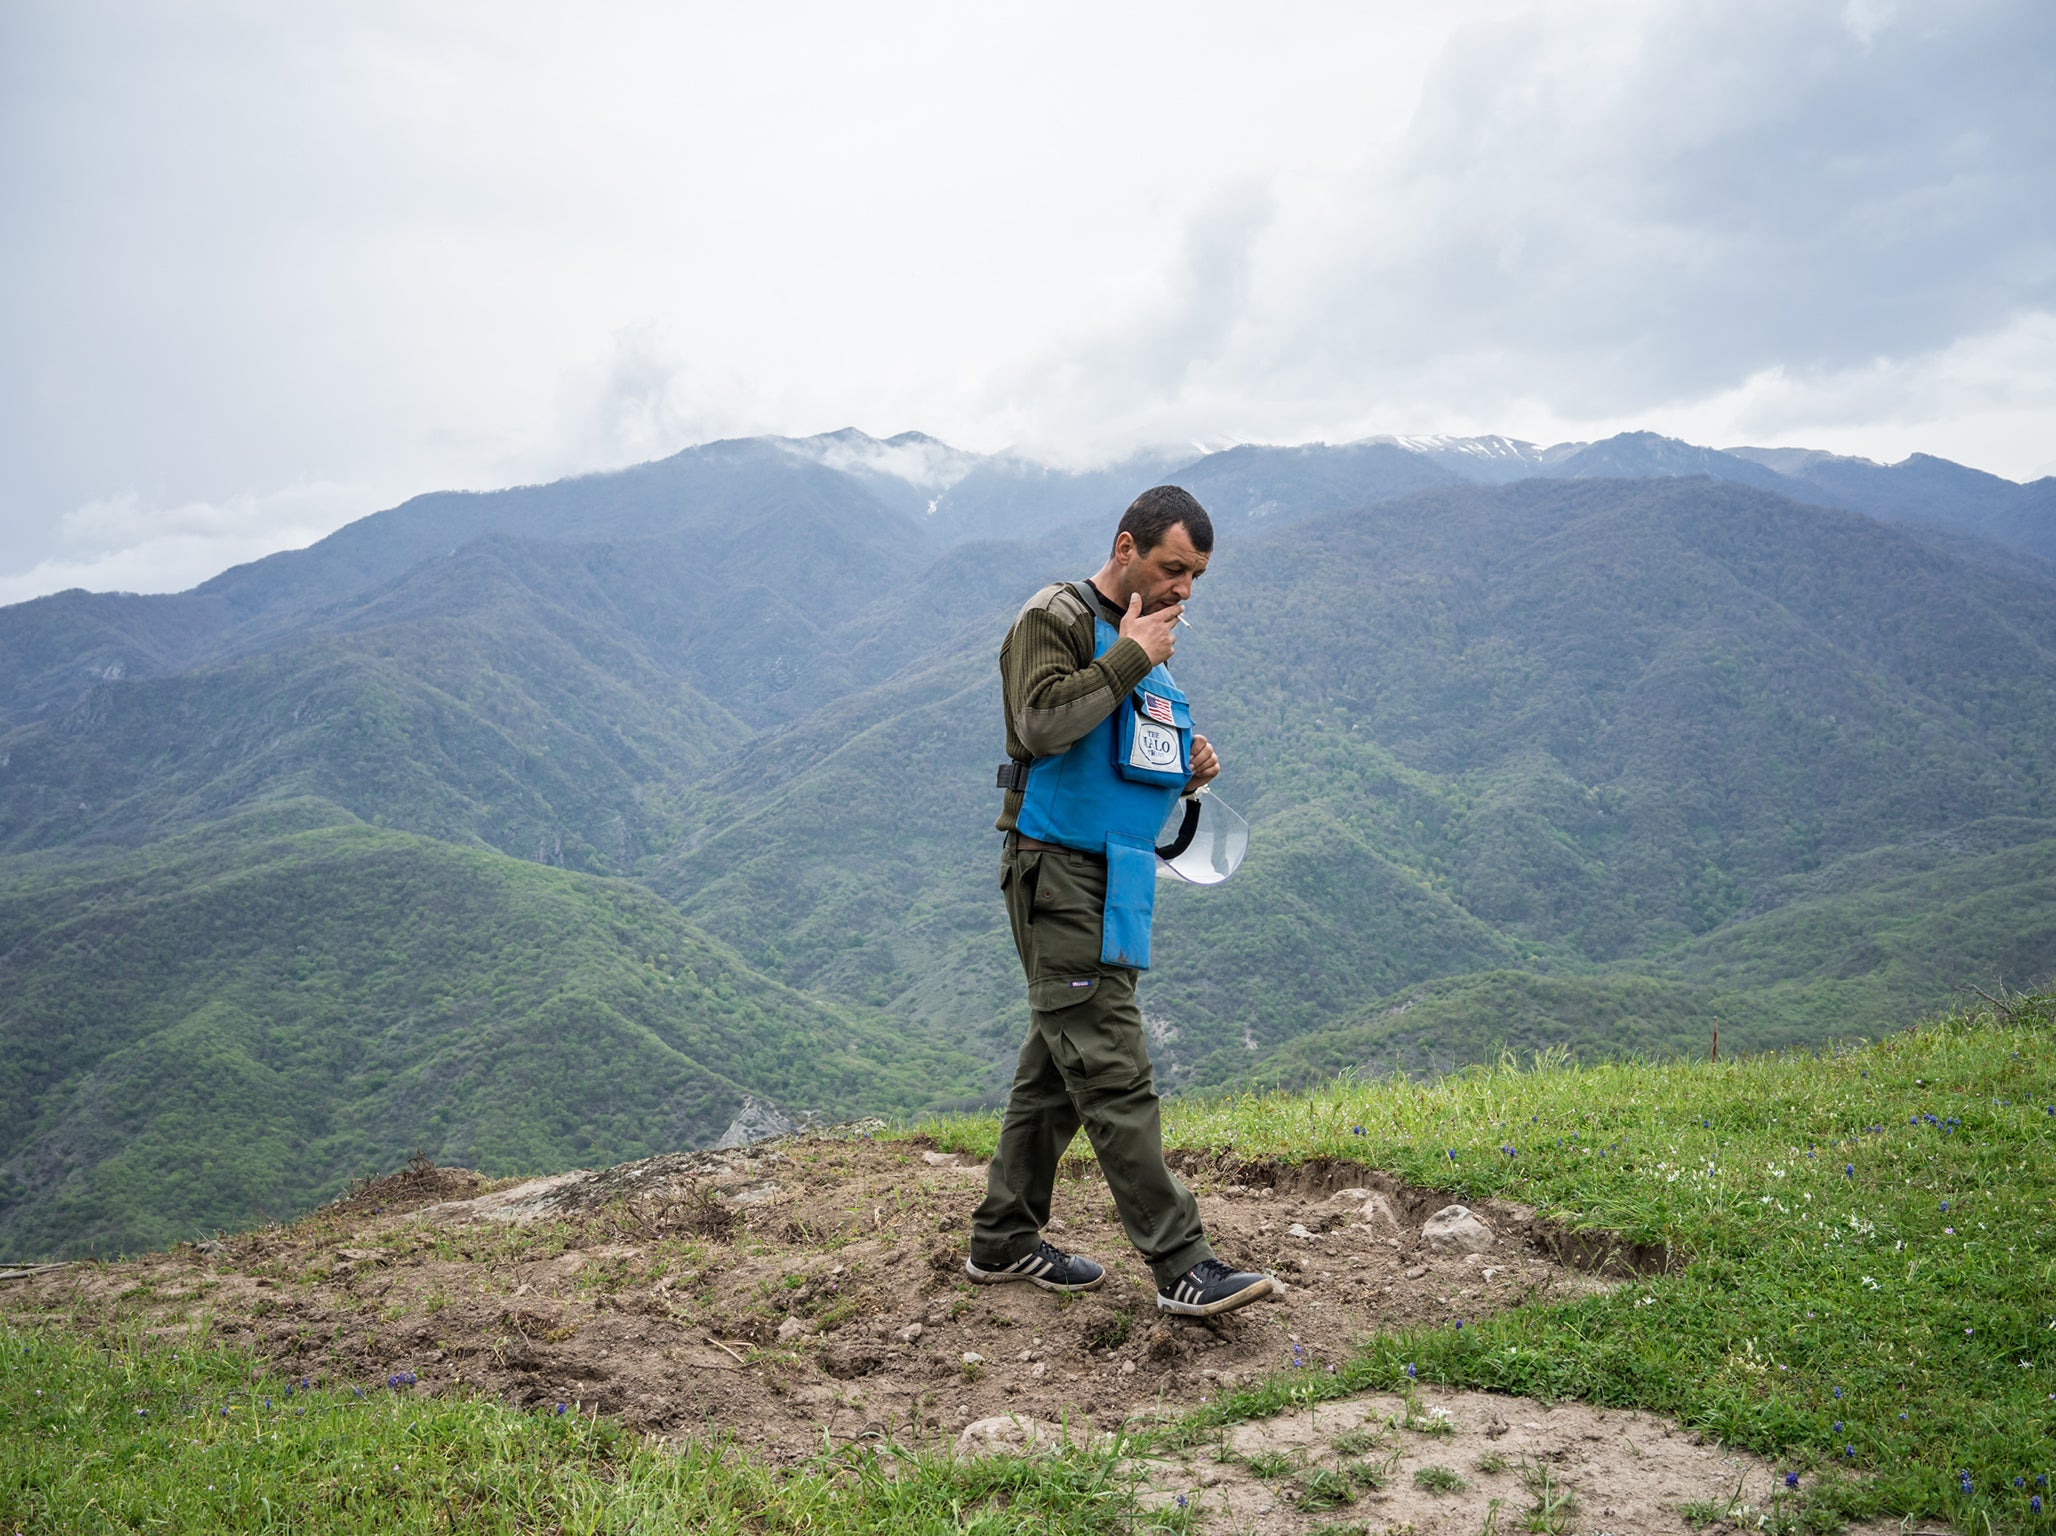 A mine clearance team member working in the Nagorno-Karabakh area